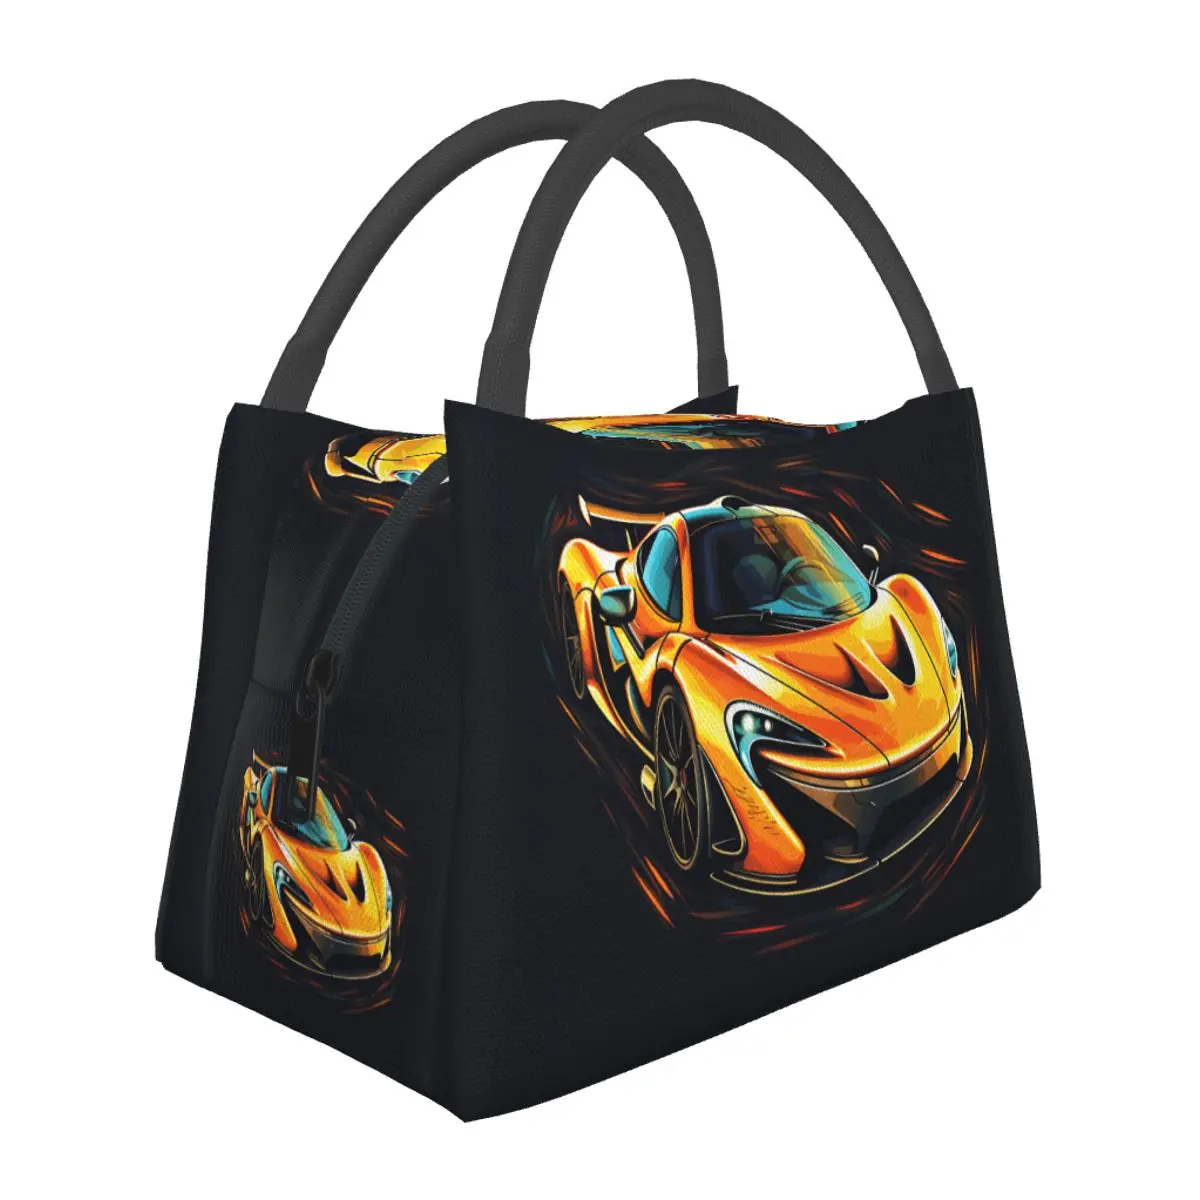 

Powerful Sports Car Lunch Bag Vibrant Tones Vintage Designer Lunch Box Casual Office Cooler Bag Insulated Thermal Tote Handbags